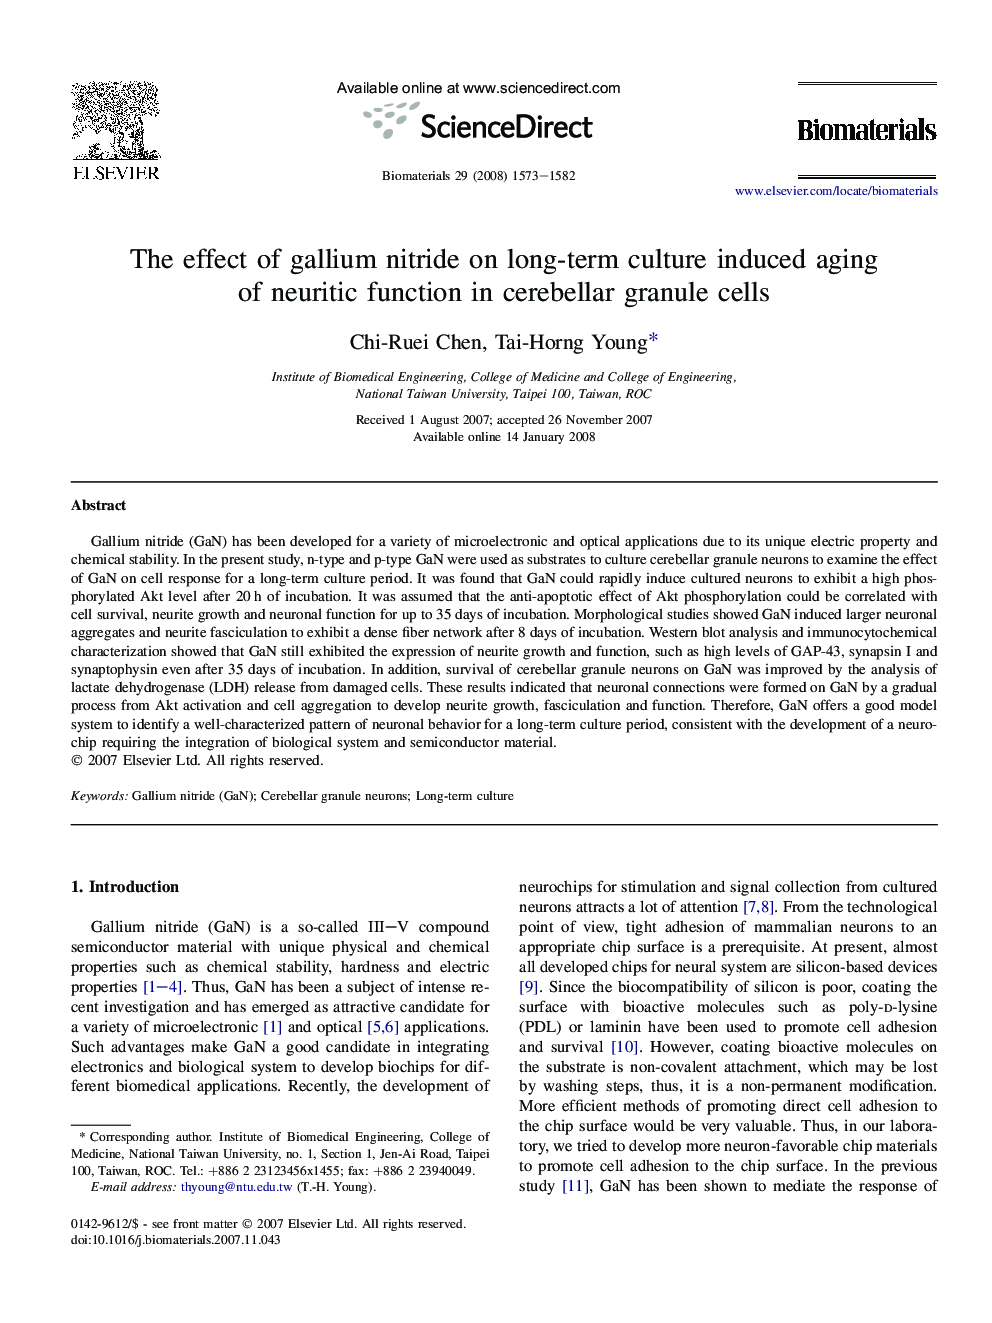 The effect of gallium nitride on long-term culture induced aging of neuritic function in cerebellar granule cells